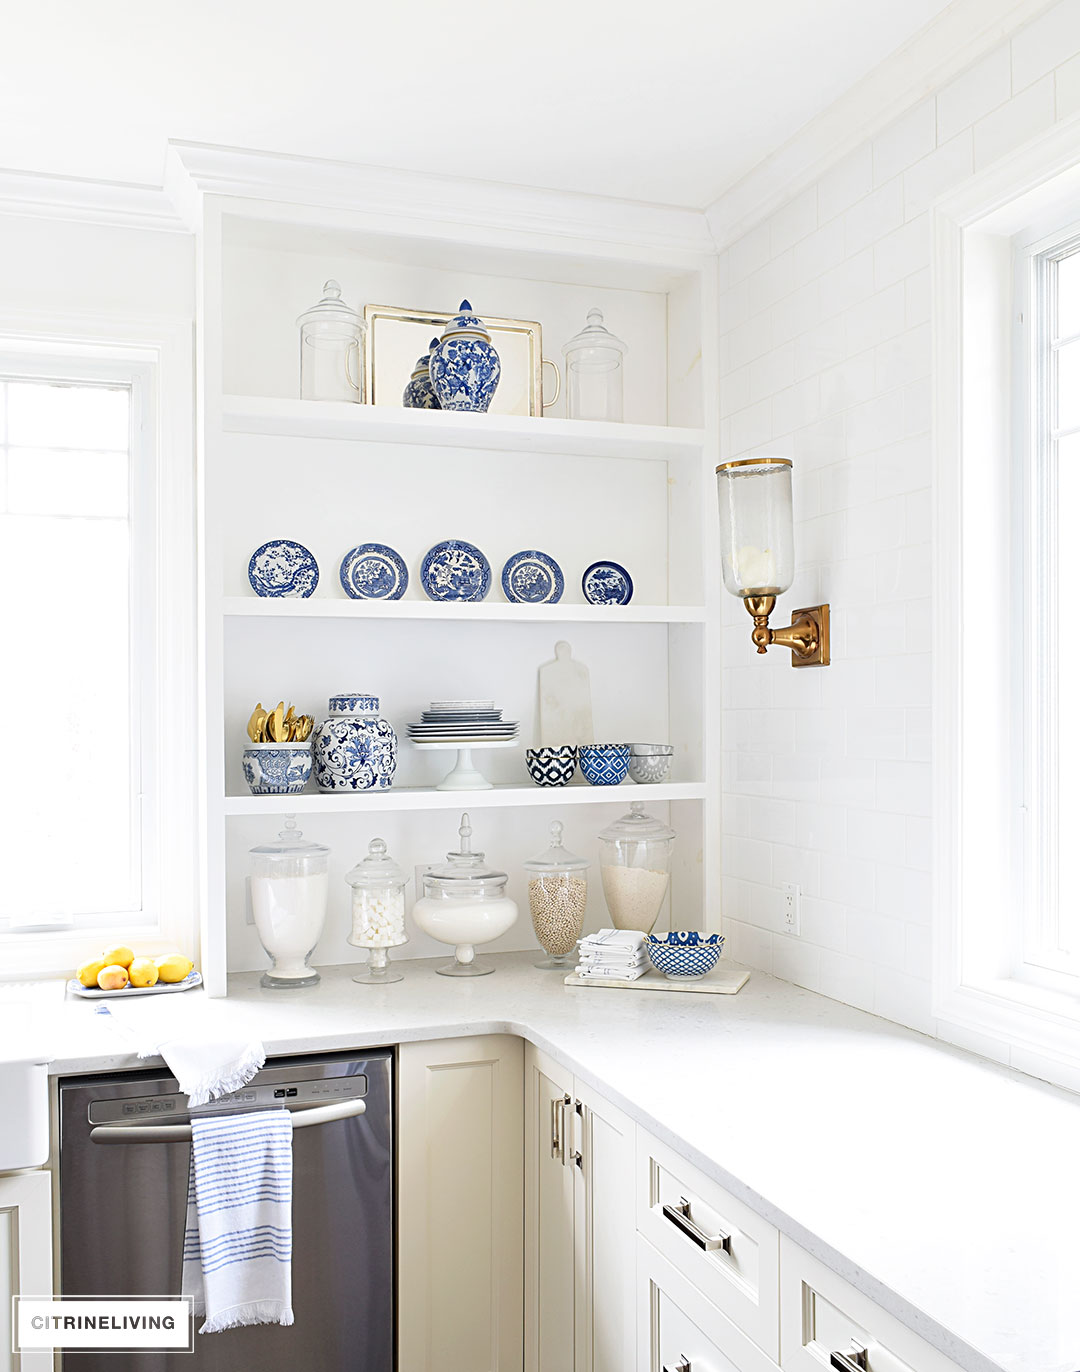 A gorgeous display of blue and white accessories and dishware on open shelving is sophisticated and elegant. 